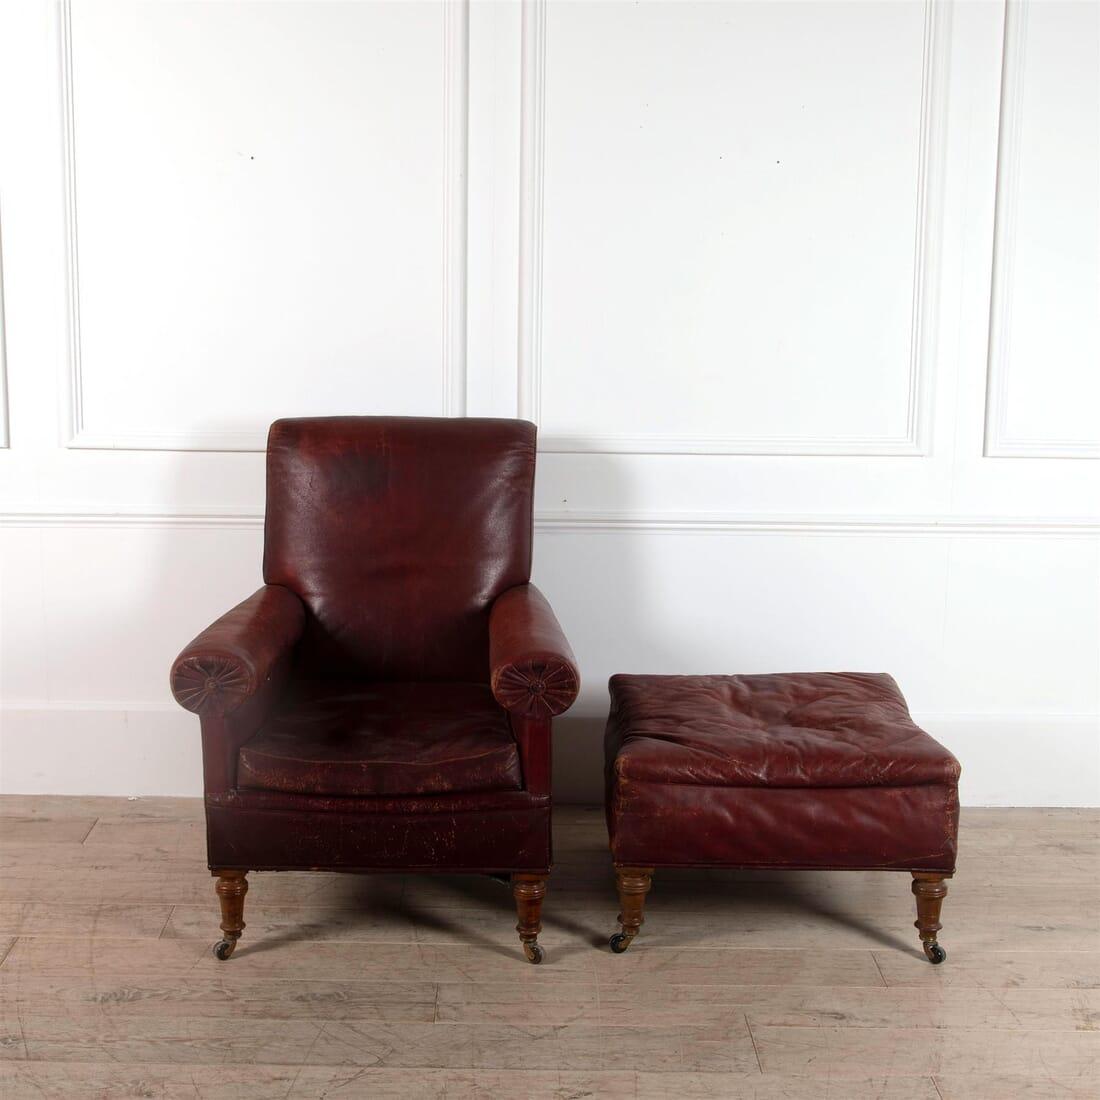 Late 19th century English library armchair and footstool in blonde oak, retaining old red leather upholstery. Mellow, worn and beautiful, circa 1870.

Footstool dimensions: H 44cm, W 69cm, D 69cm.